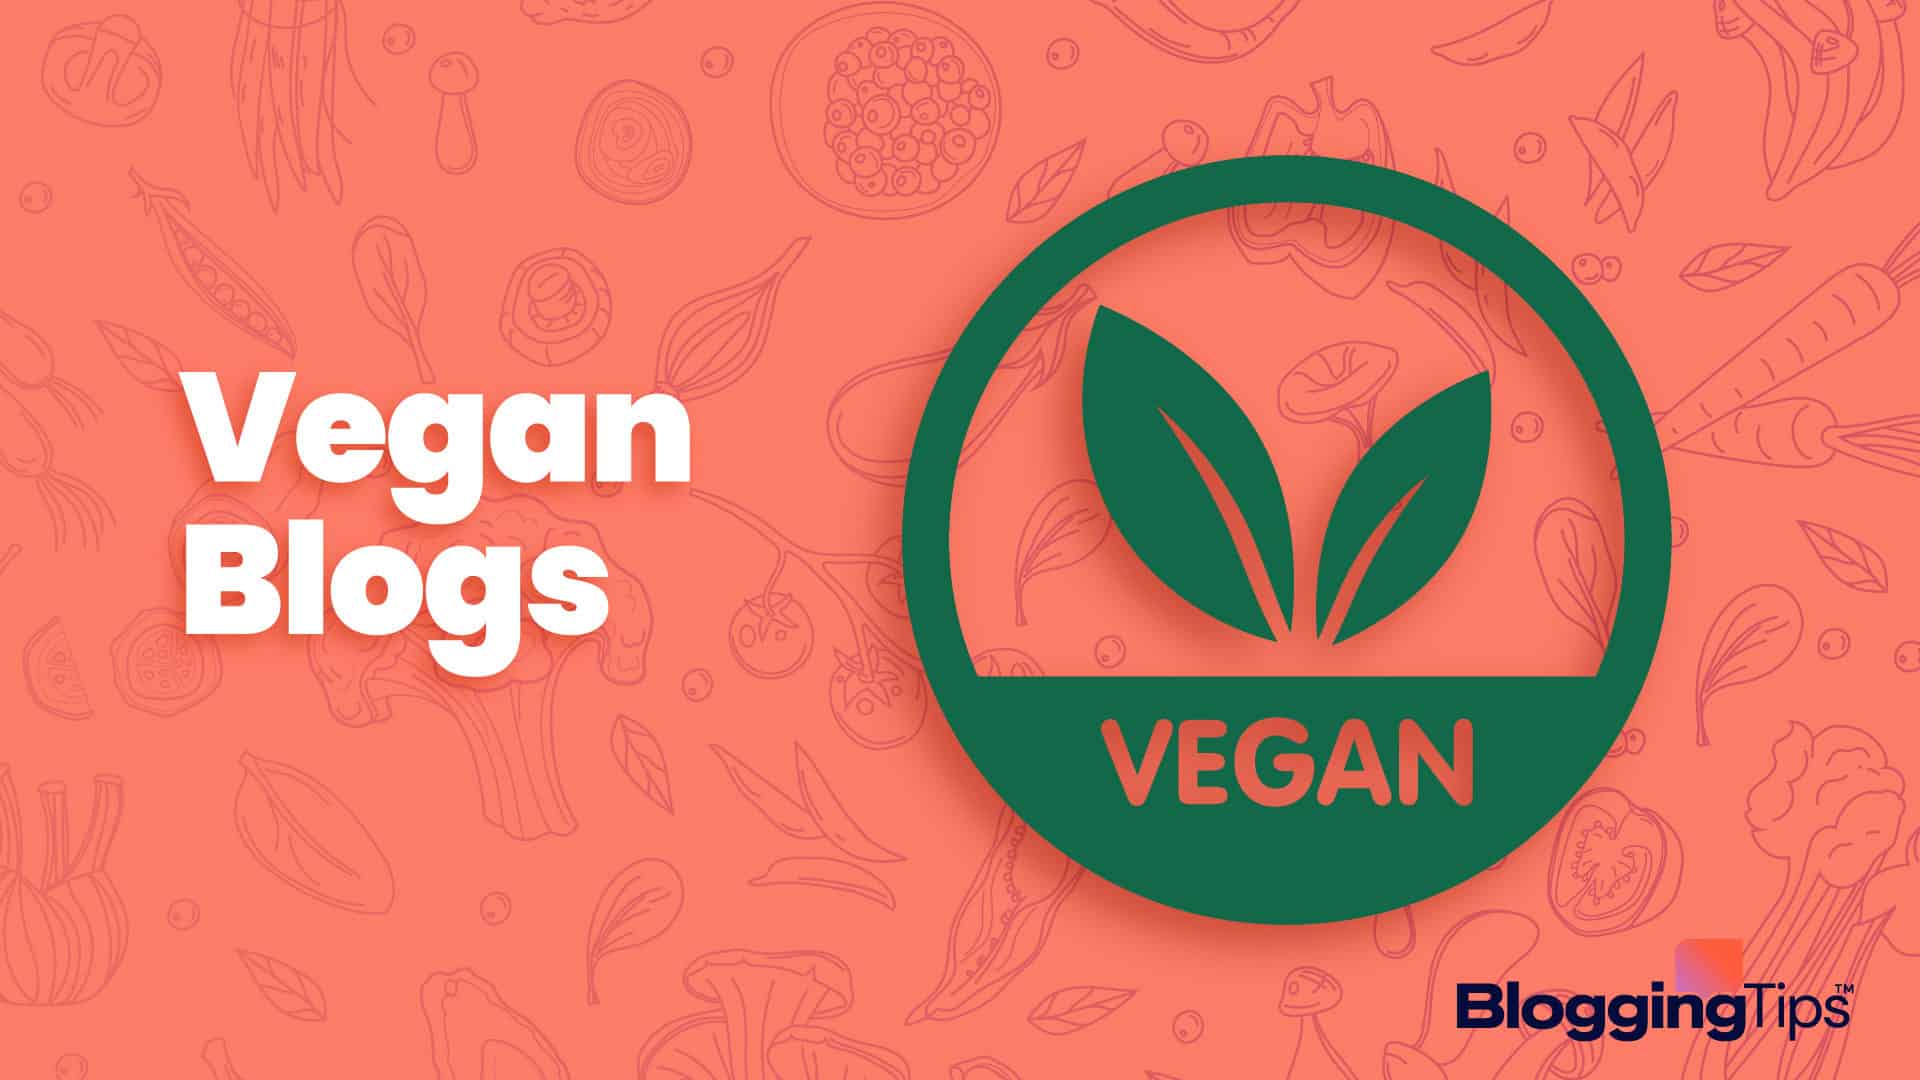 vector graphic showing an illustration of vegan blogs